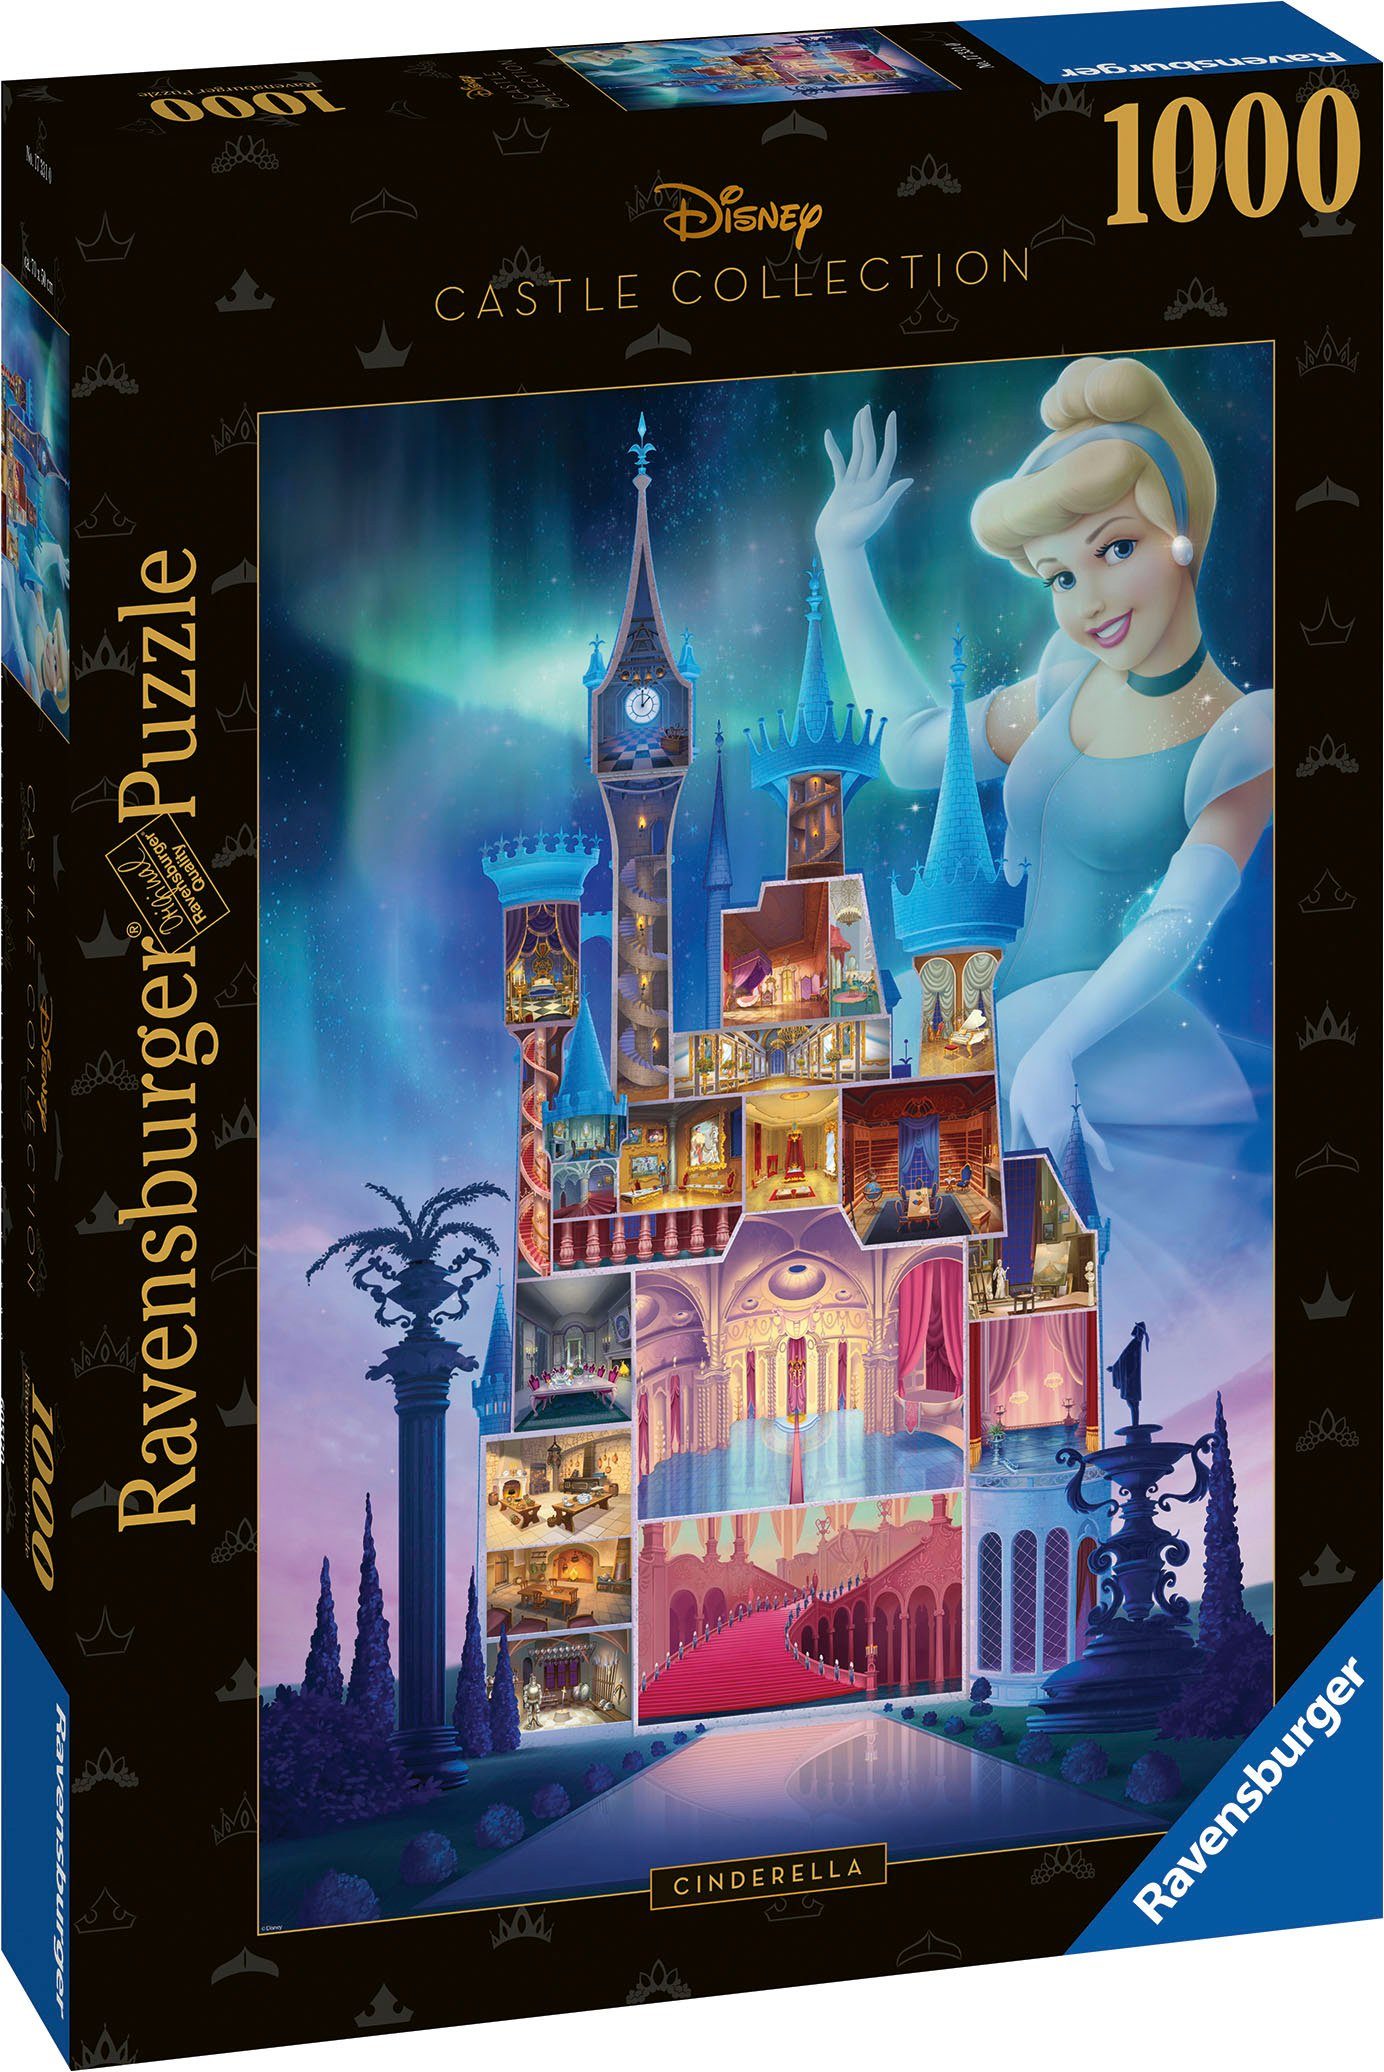 1000 Castle Puzzleteile, Disney Germany Ravensburger Made Cinderella, Collection, Puzzle in